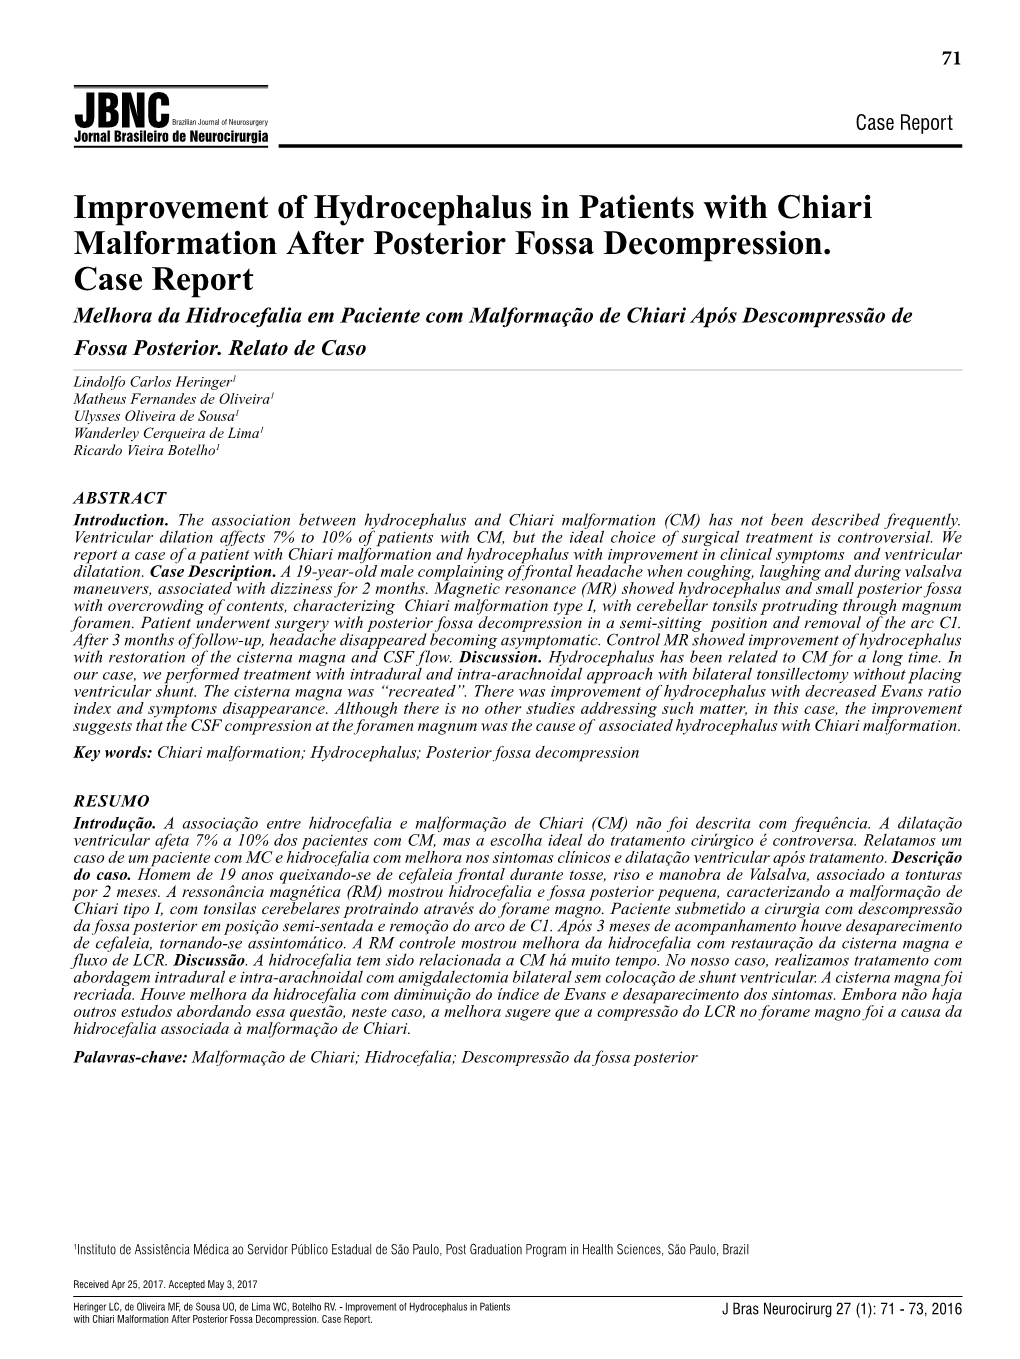 Improvement of Hydrocephalus in Patients with Chiari Malformation After Posterior Fossa Decompression